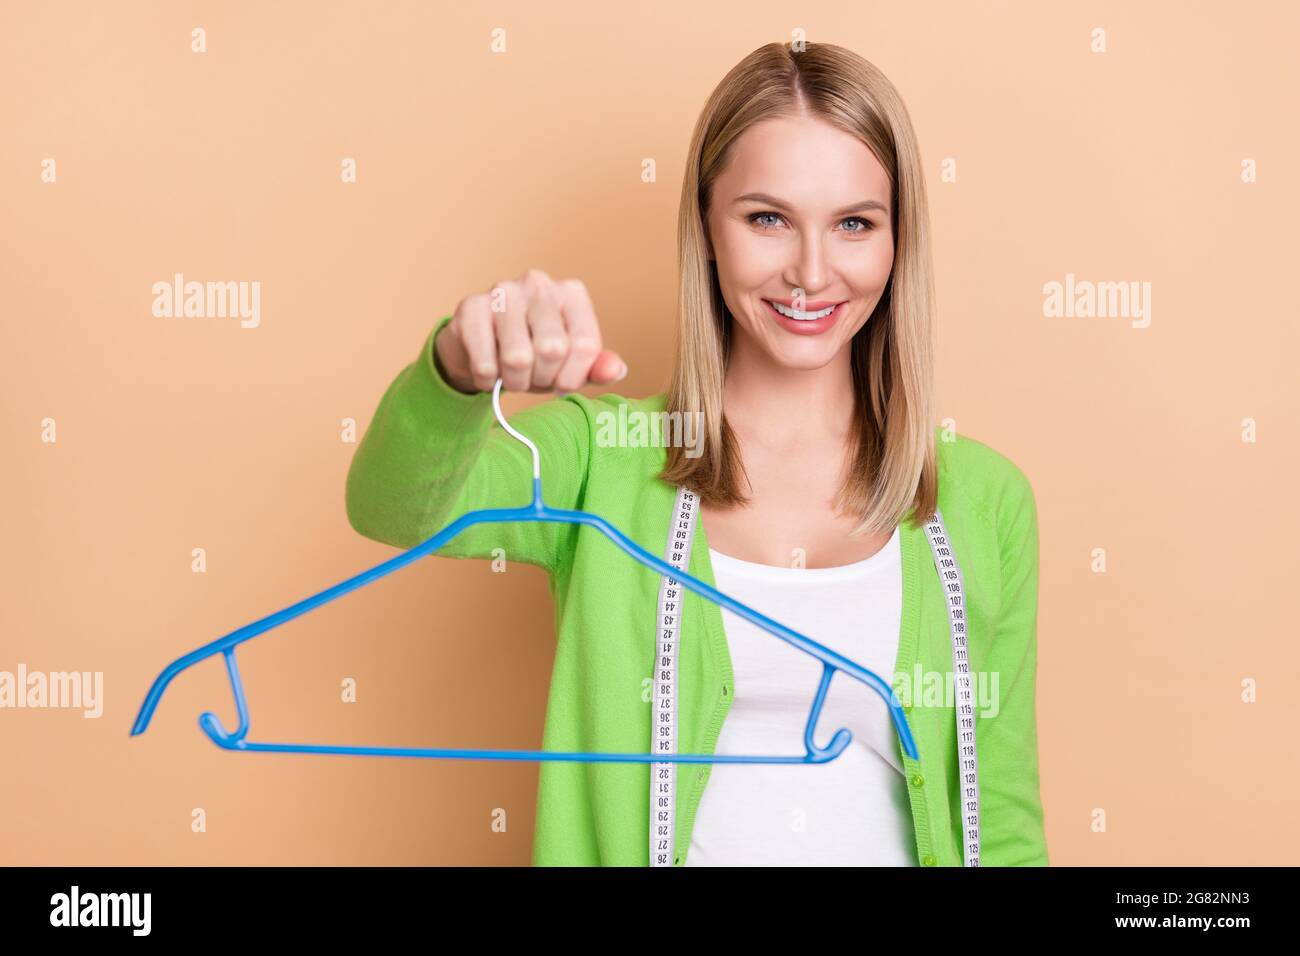 Woman Measuring Tape. Image & Photo (Free Trial)